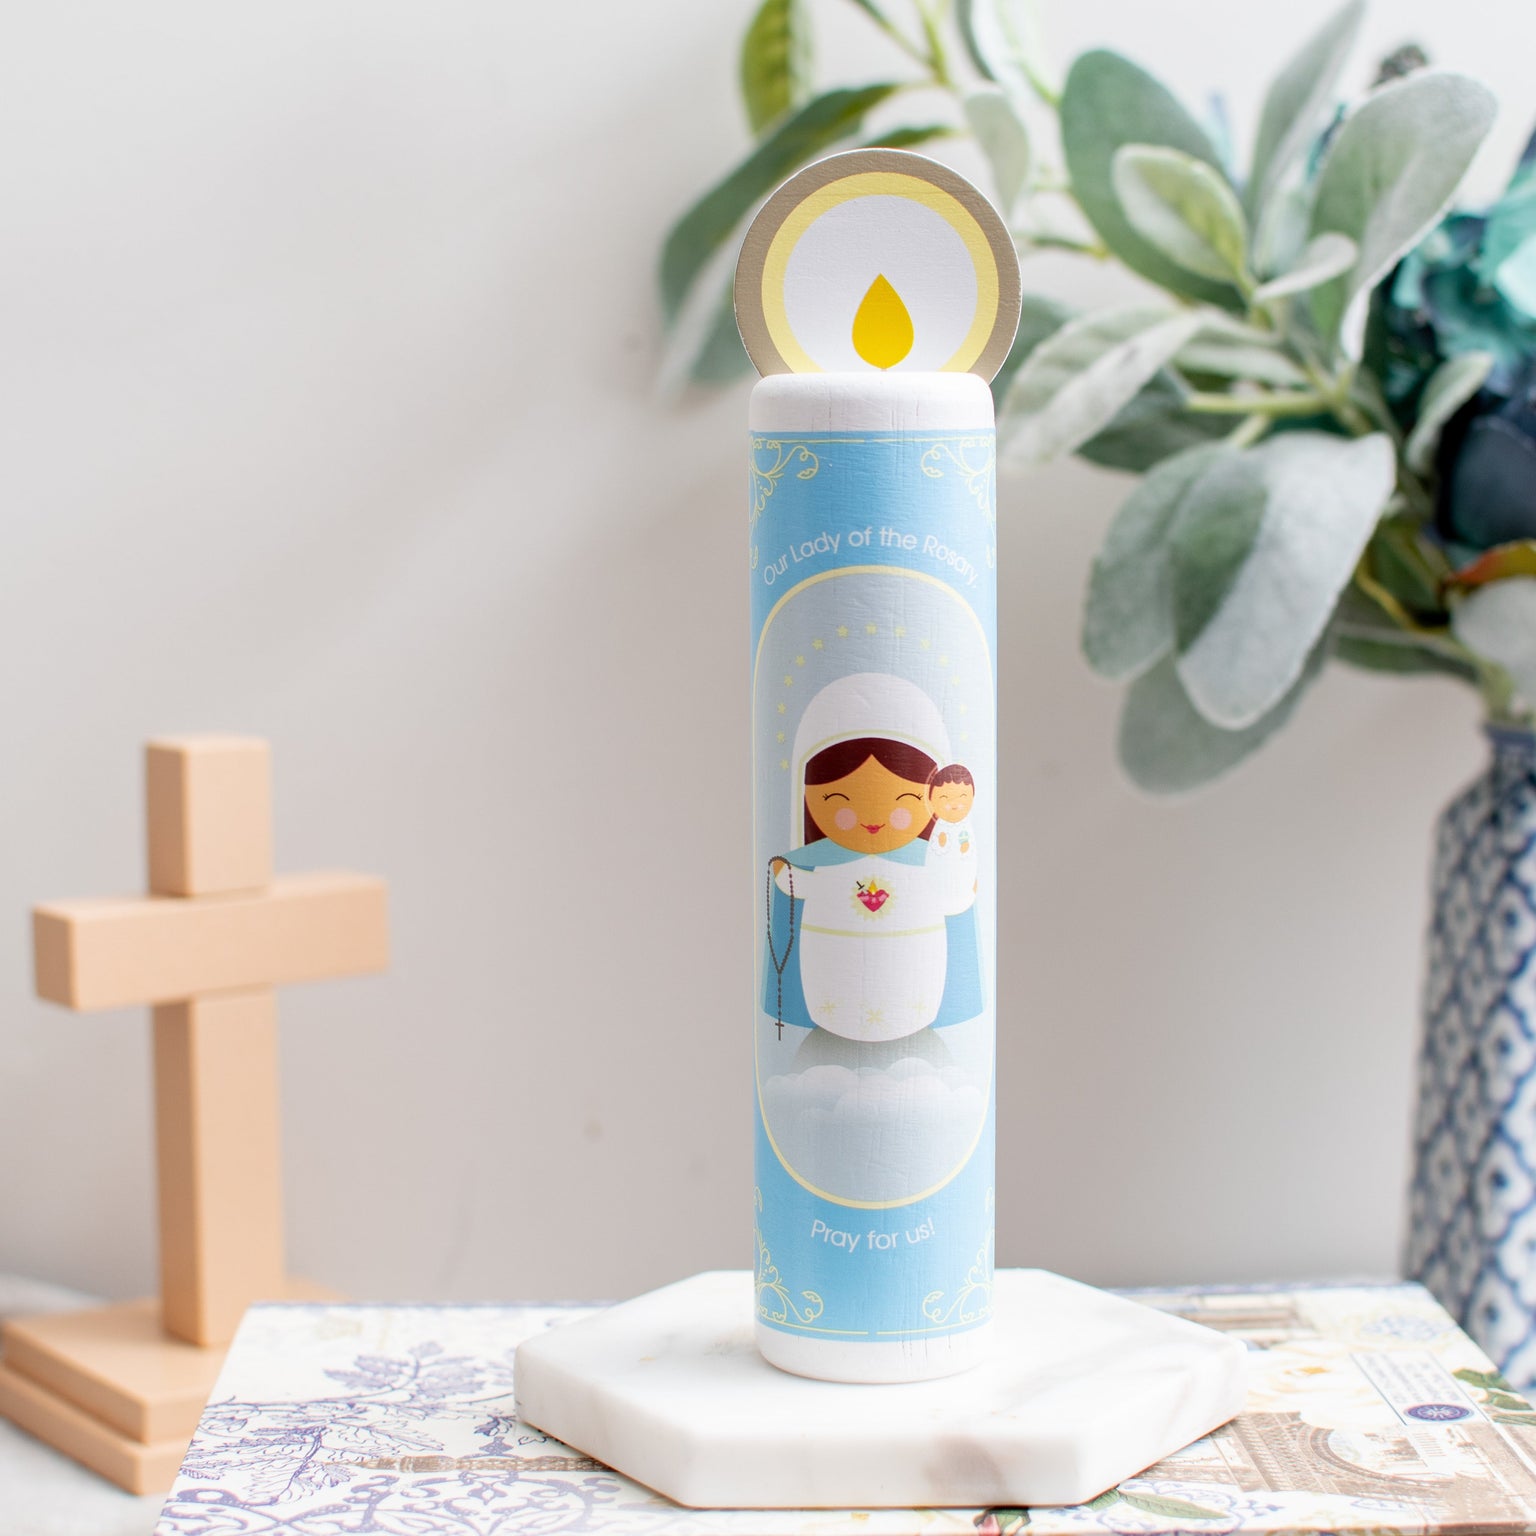 Our Lady of the Rosary (Hail Mary) Wooden Prayer Candle